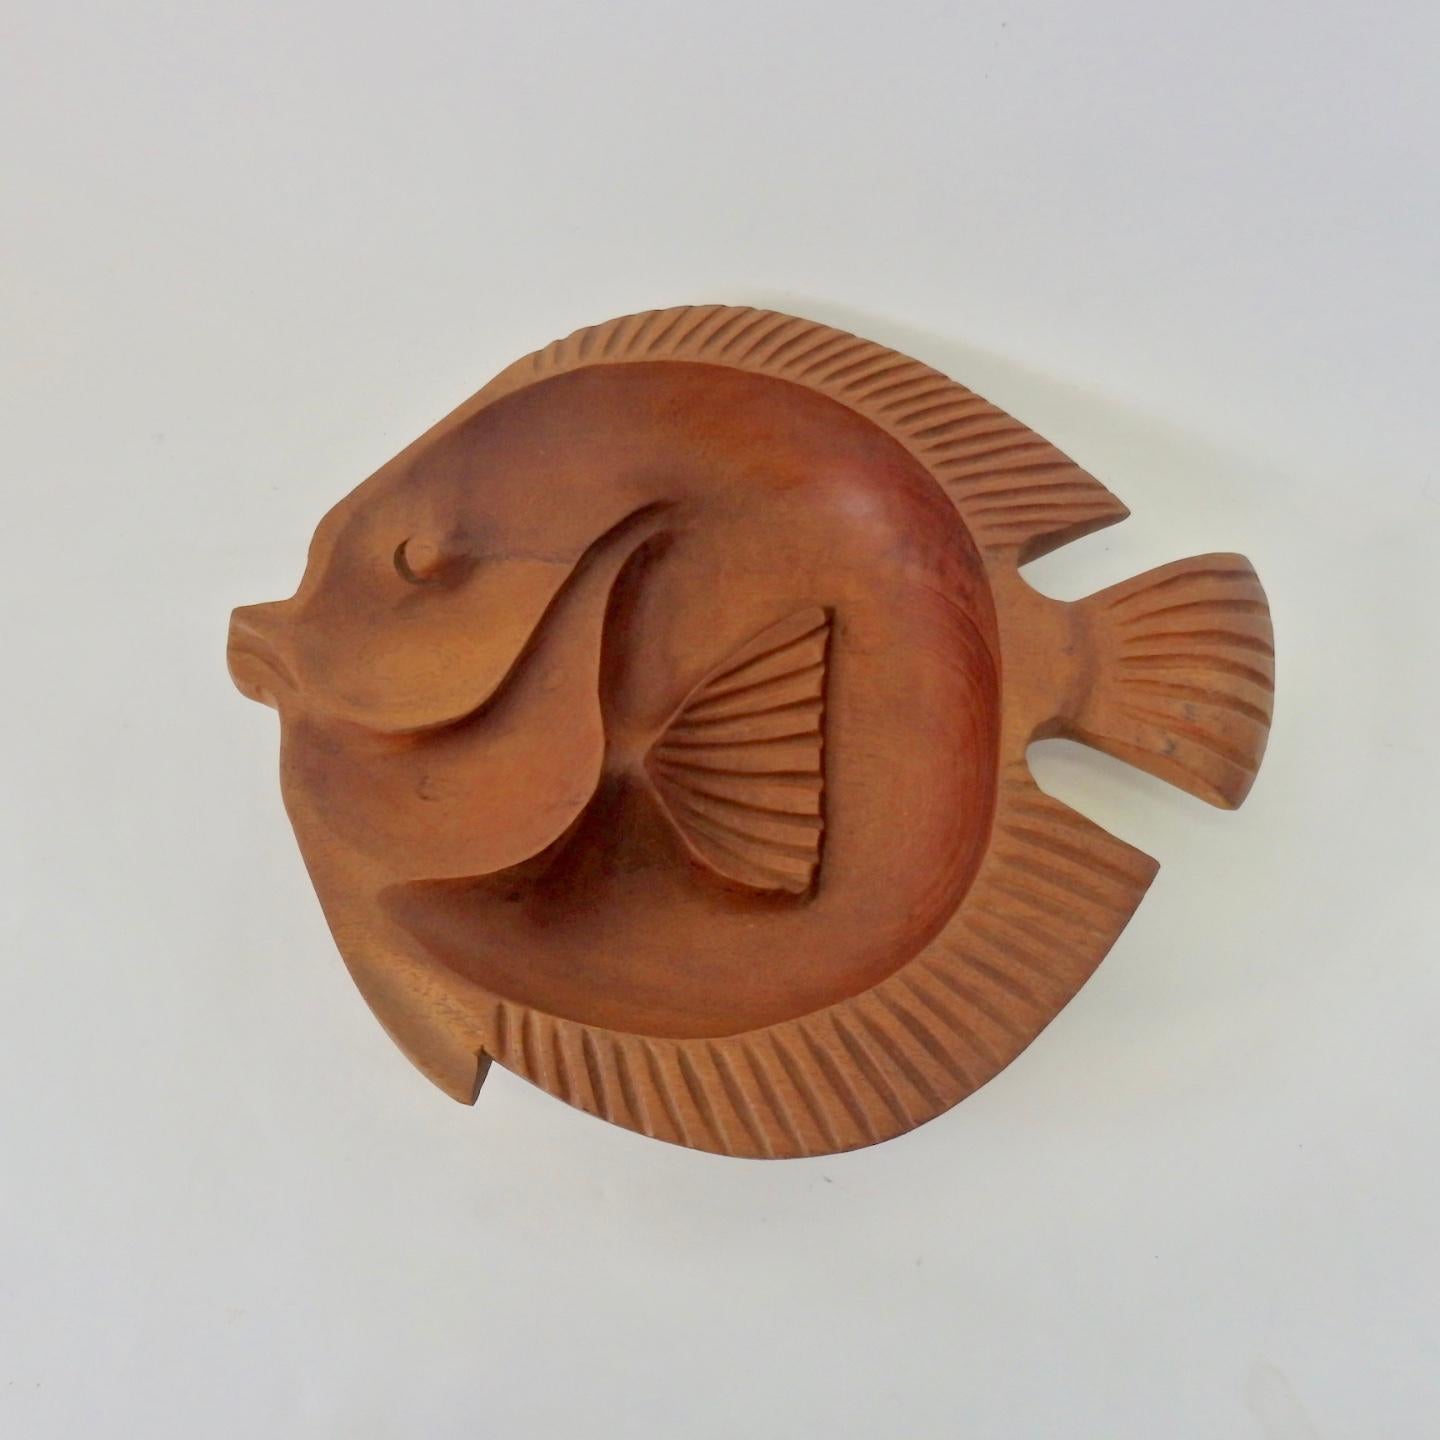 Fish form carved from solid piece of wood.